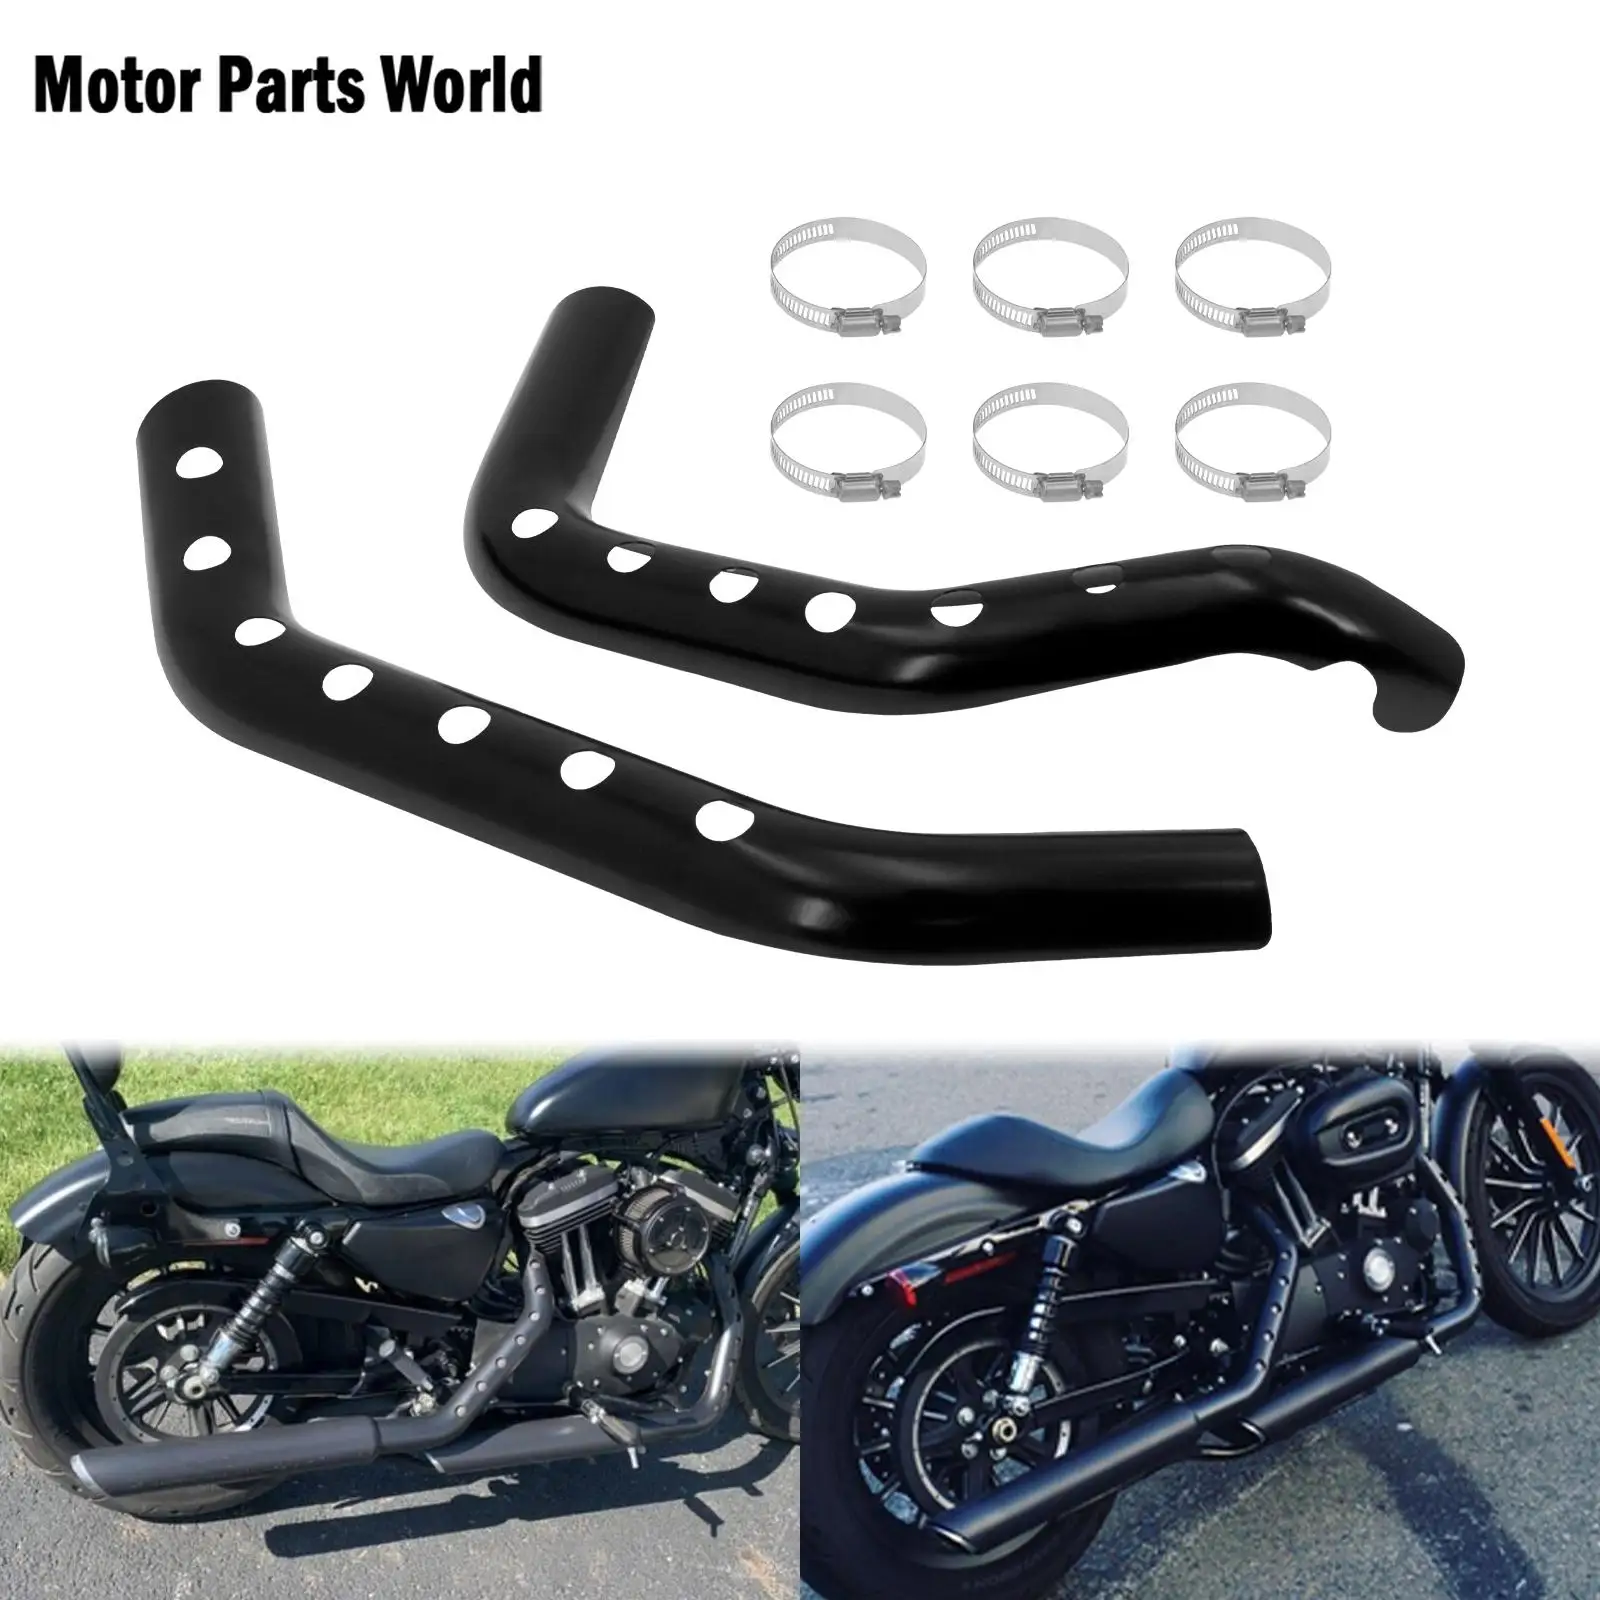 Enlarge Motorcycle Exhaust Pipe Heat Shield Muffler Guard Protective Cover Black For Harley Sportster XL883 1200 Forty-Eight 2004-2021